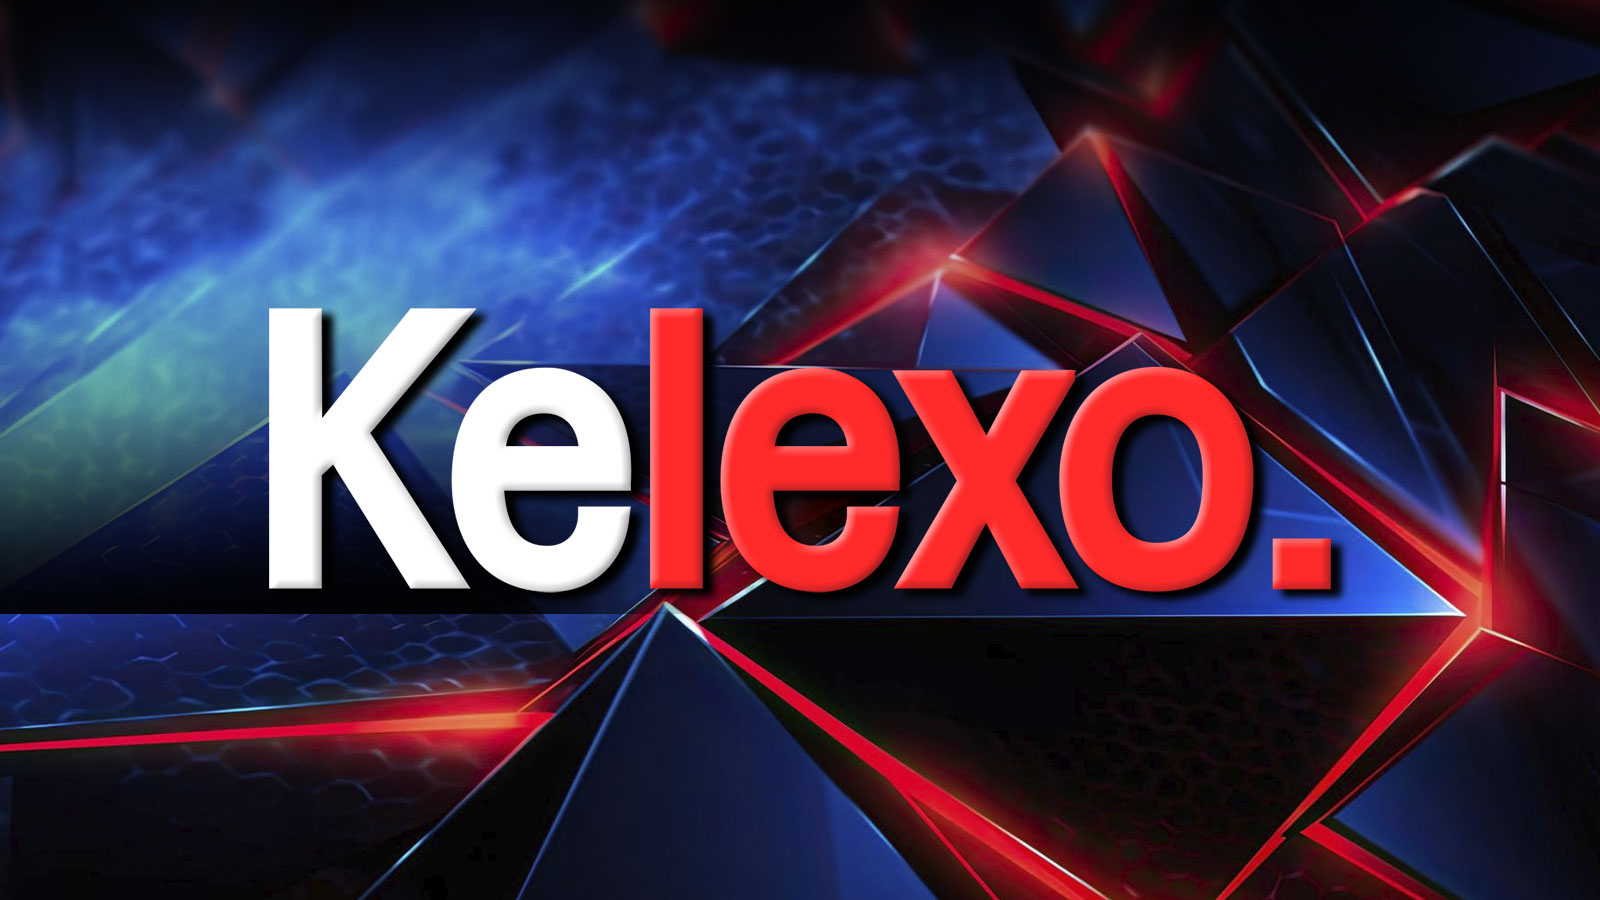 Kelexo (KLXO) Cryptocurrency Sale Initiative Now Spotlighted by Altcoiners while Filecoin (FIL) and Ethereum (ETH) Communities Remain Optimistic